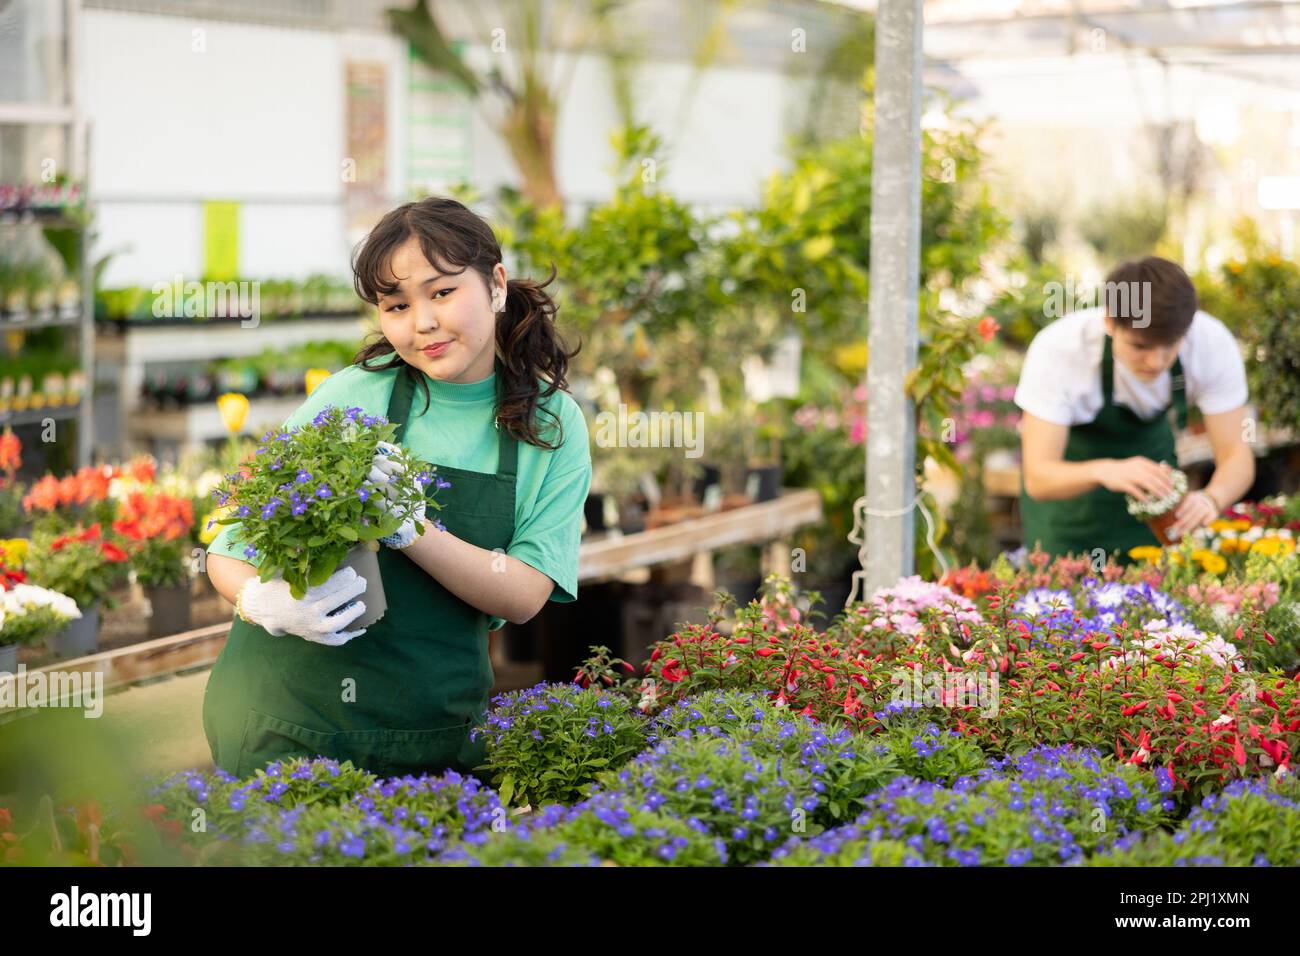 Vendor in flower shop inspects price tags on pots with young lobelia plants and re-evaluates goods Stock Photo